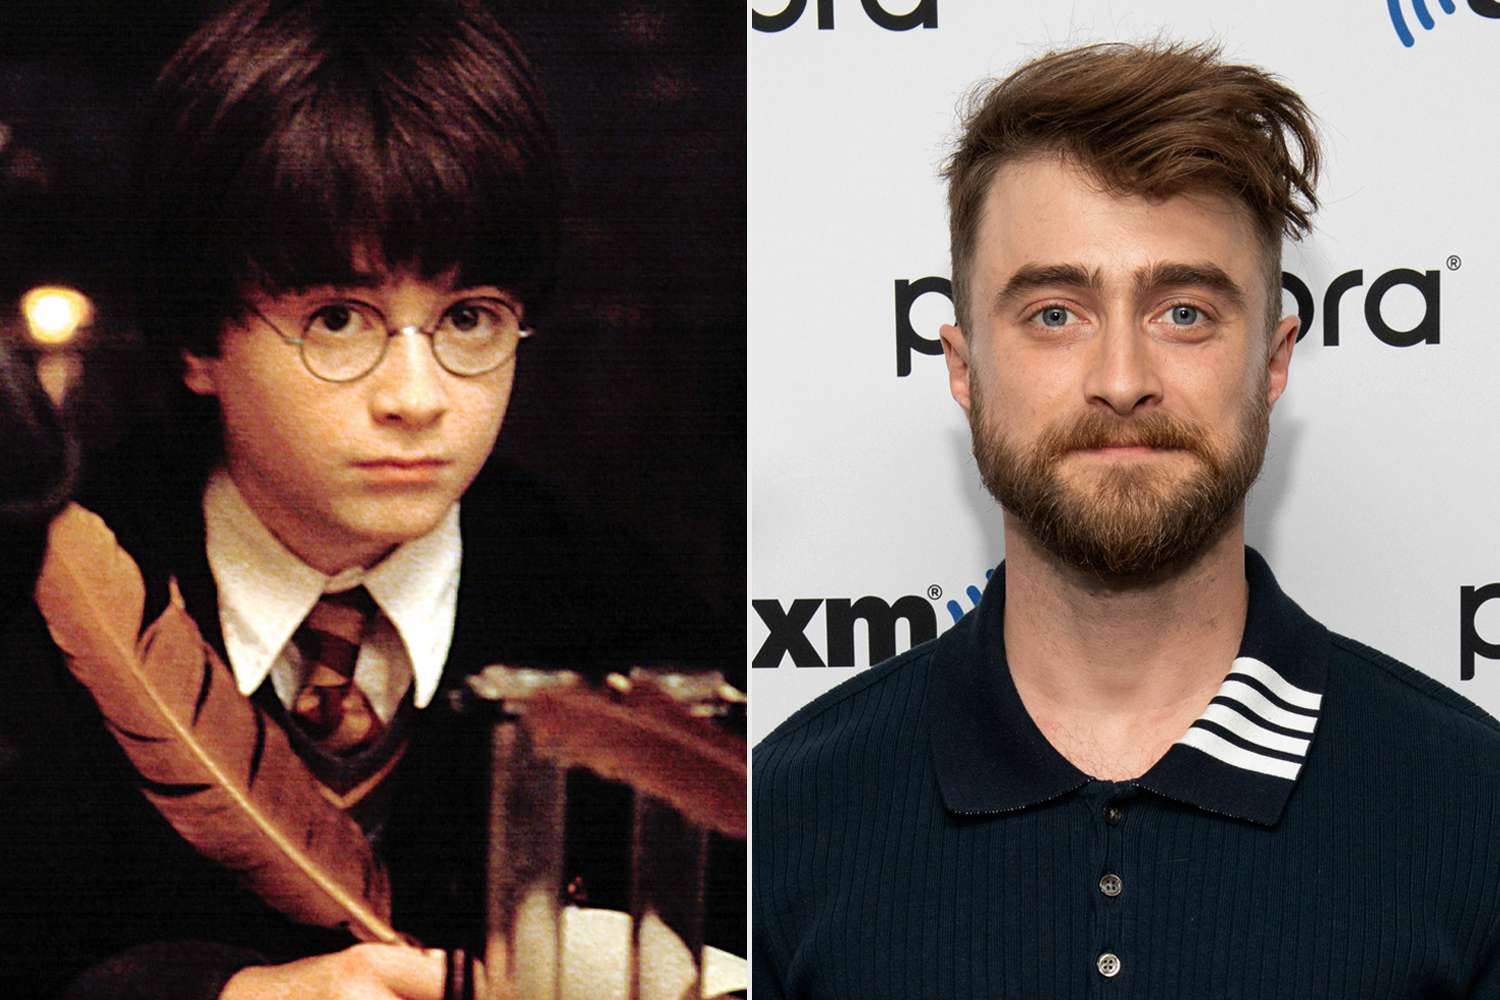 Daniel Radcliffe Then (Left) and Now (Right) (Credits: People)